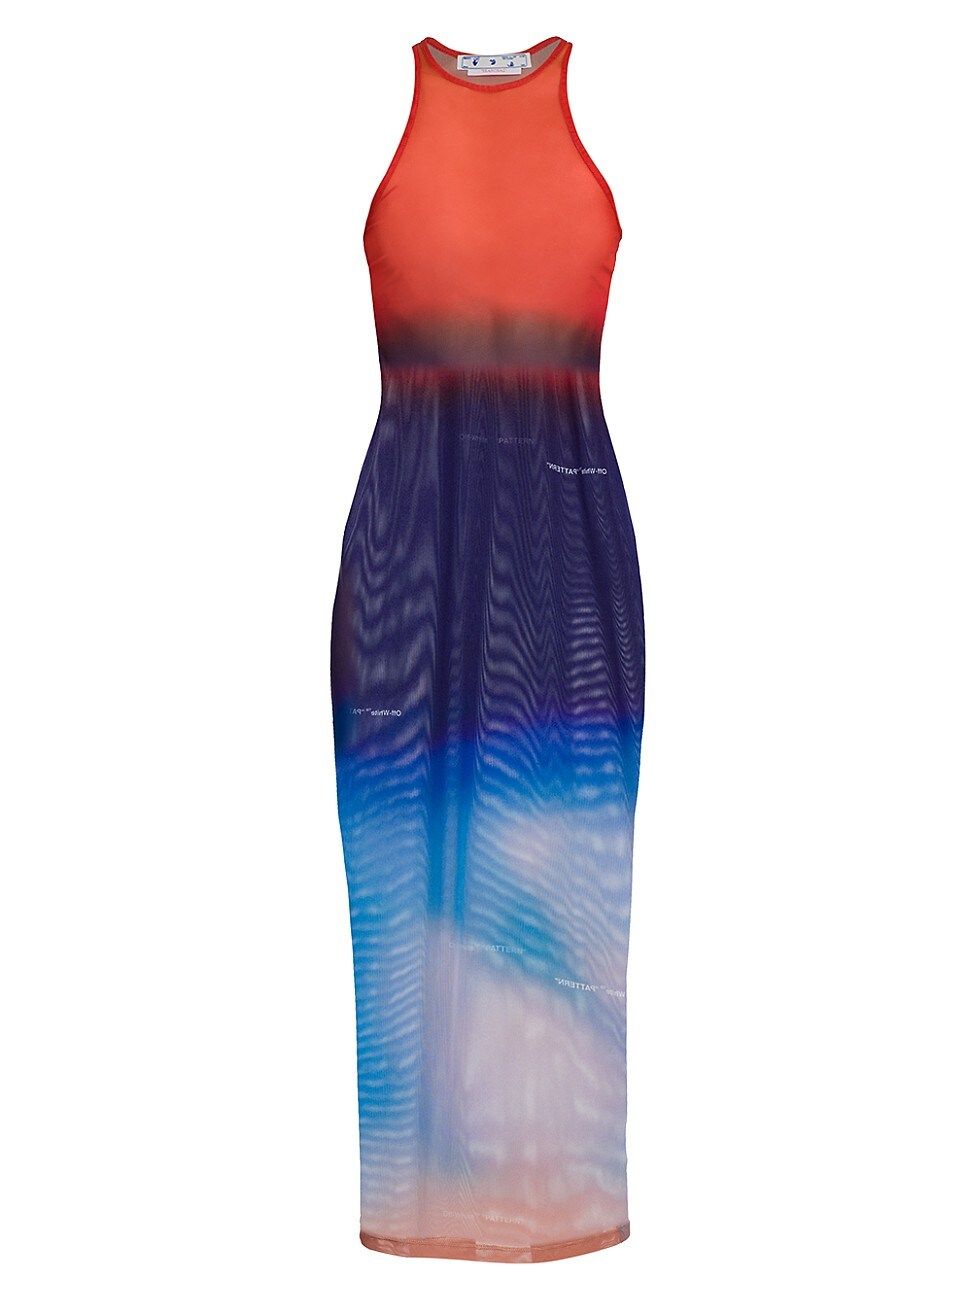 Women's Sleeveless Sheer Rowing Dress - Red Blue - Size 2 - Red Blue - Size 2 | Saks Fifth Avenue